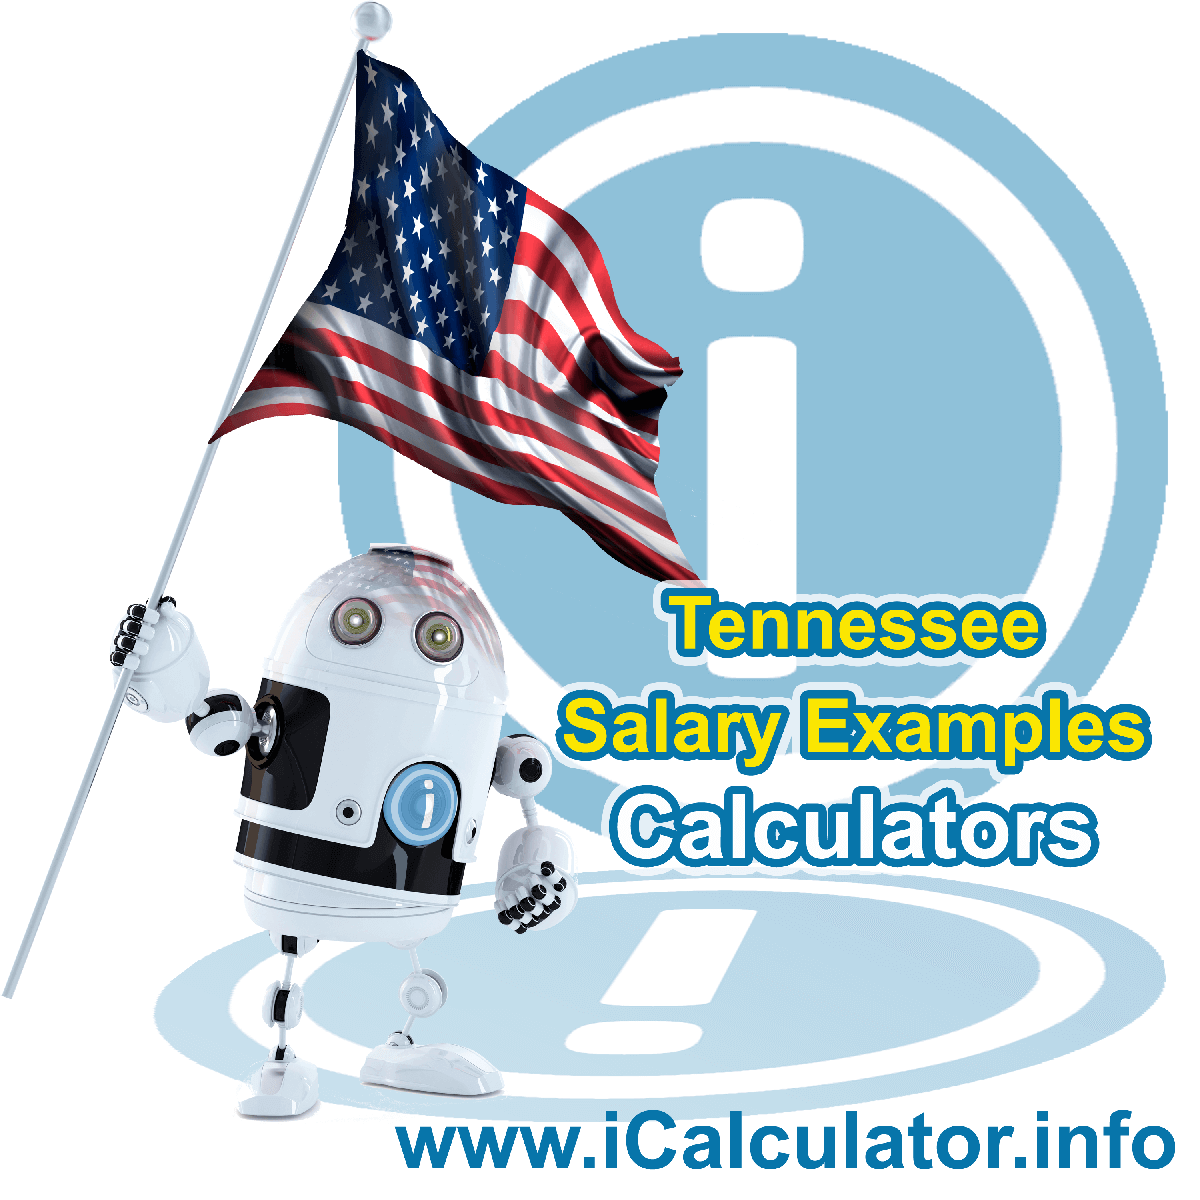 Tennessee Salary Example for $160,000.00 in 2022 | iCalculator™ | $160,000.00 salary example for employee and employer paying Tennessee State tincome taxes. Detailed salary after tax calculation including Tennessee State Tax, Federal State Tax, Medicare Deductions, Social Security, Capital Gains and other income tax and salary deductions complete with supporting Tennessee state tax tables 